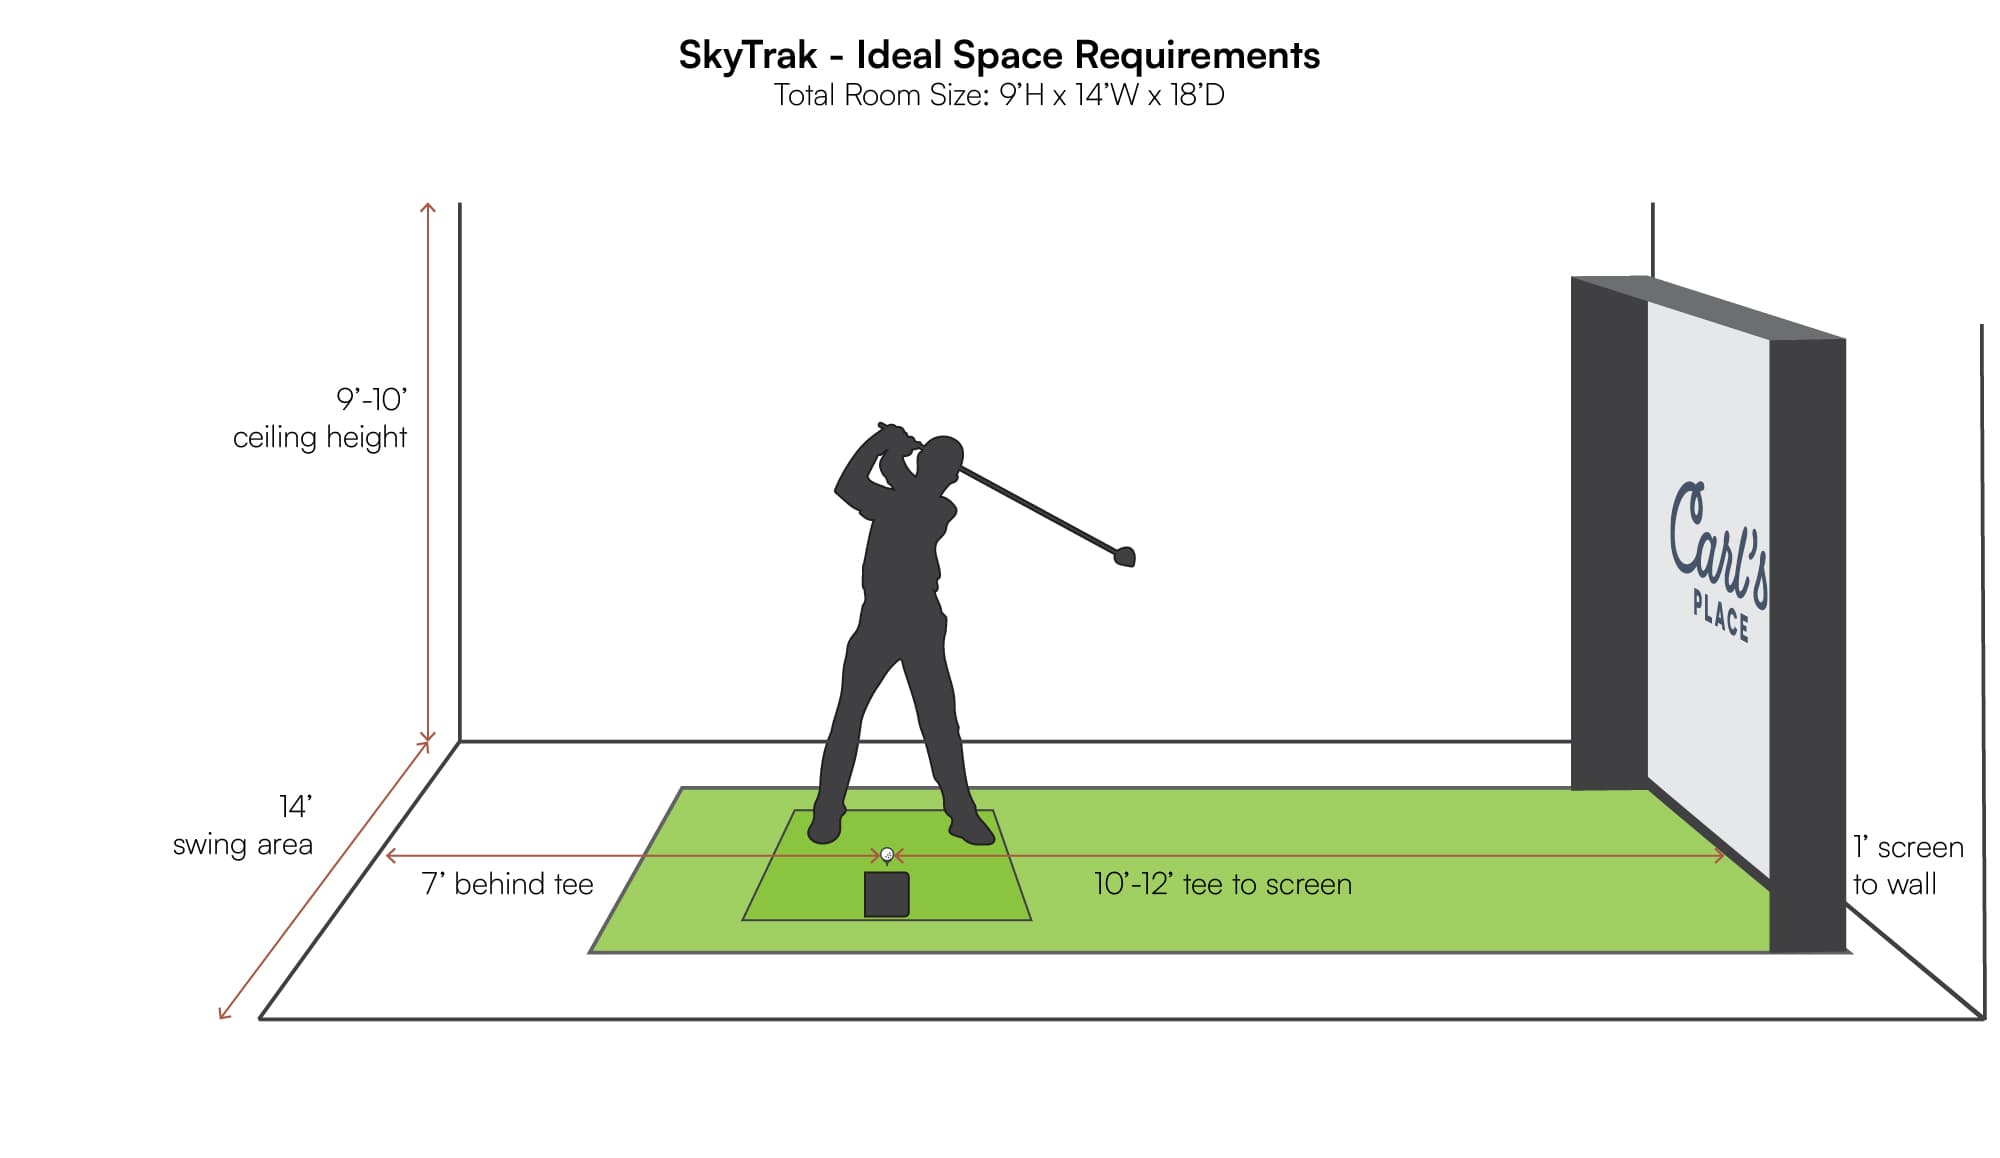 SkyTrak space requirements in golf simulator